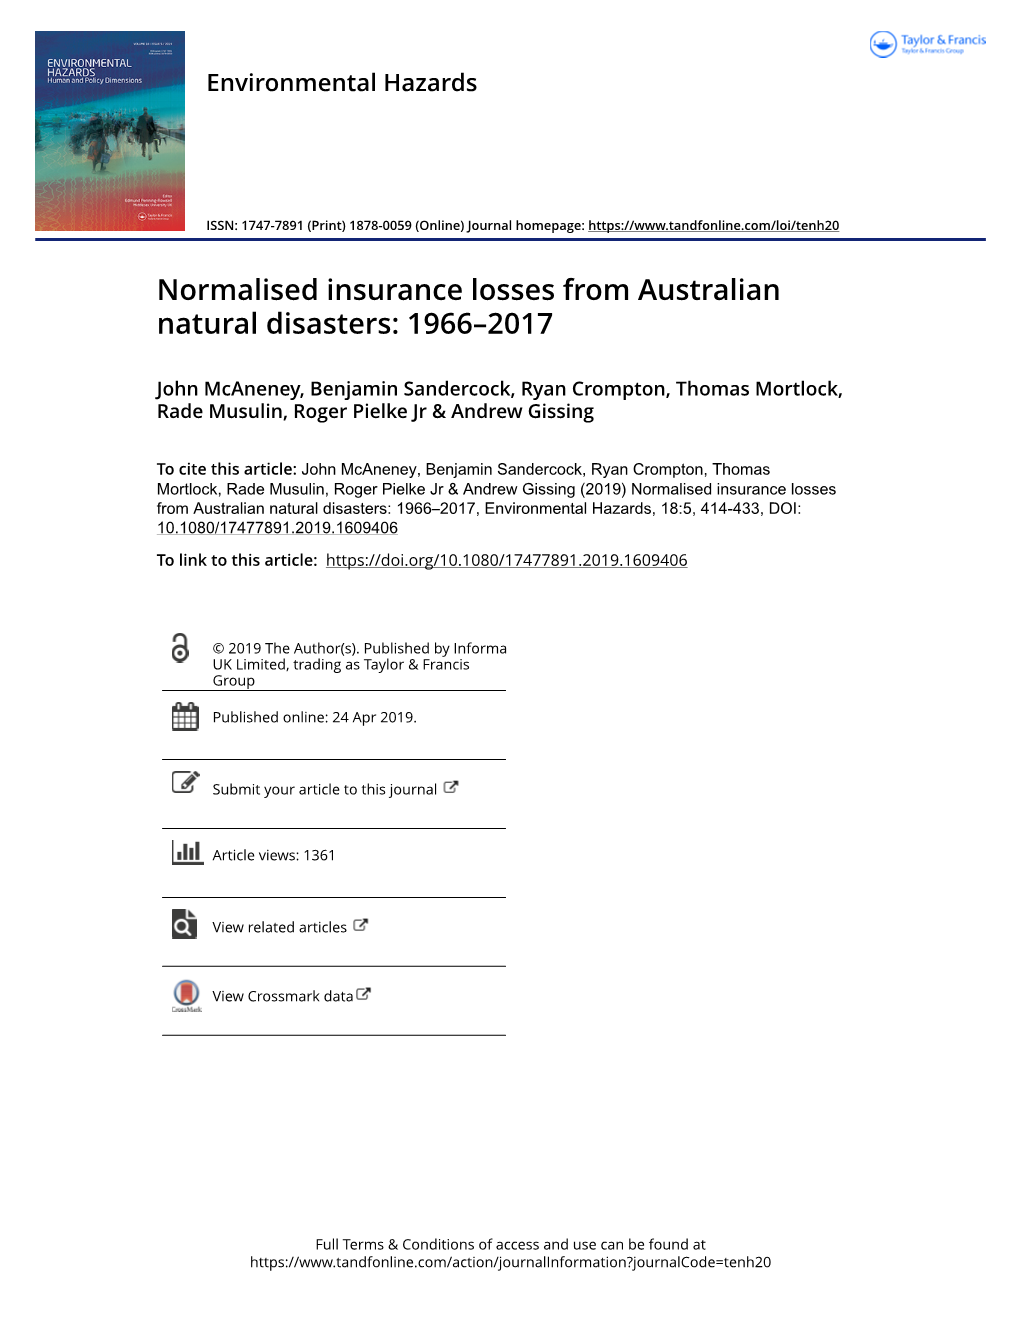 Normalised Insurance Losses from Australian Natural Disasters: 1966–2017